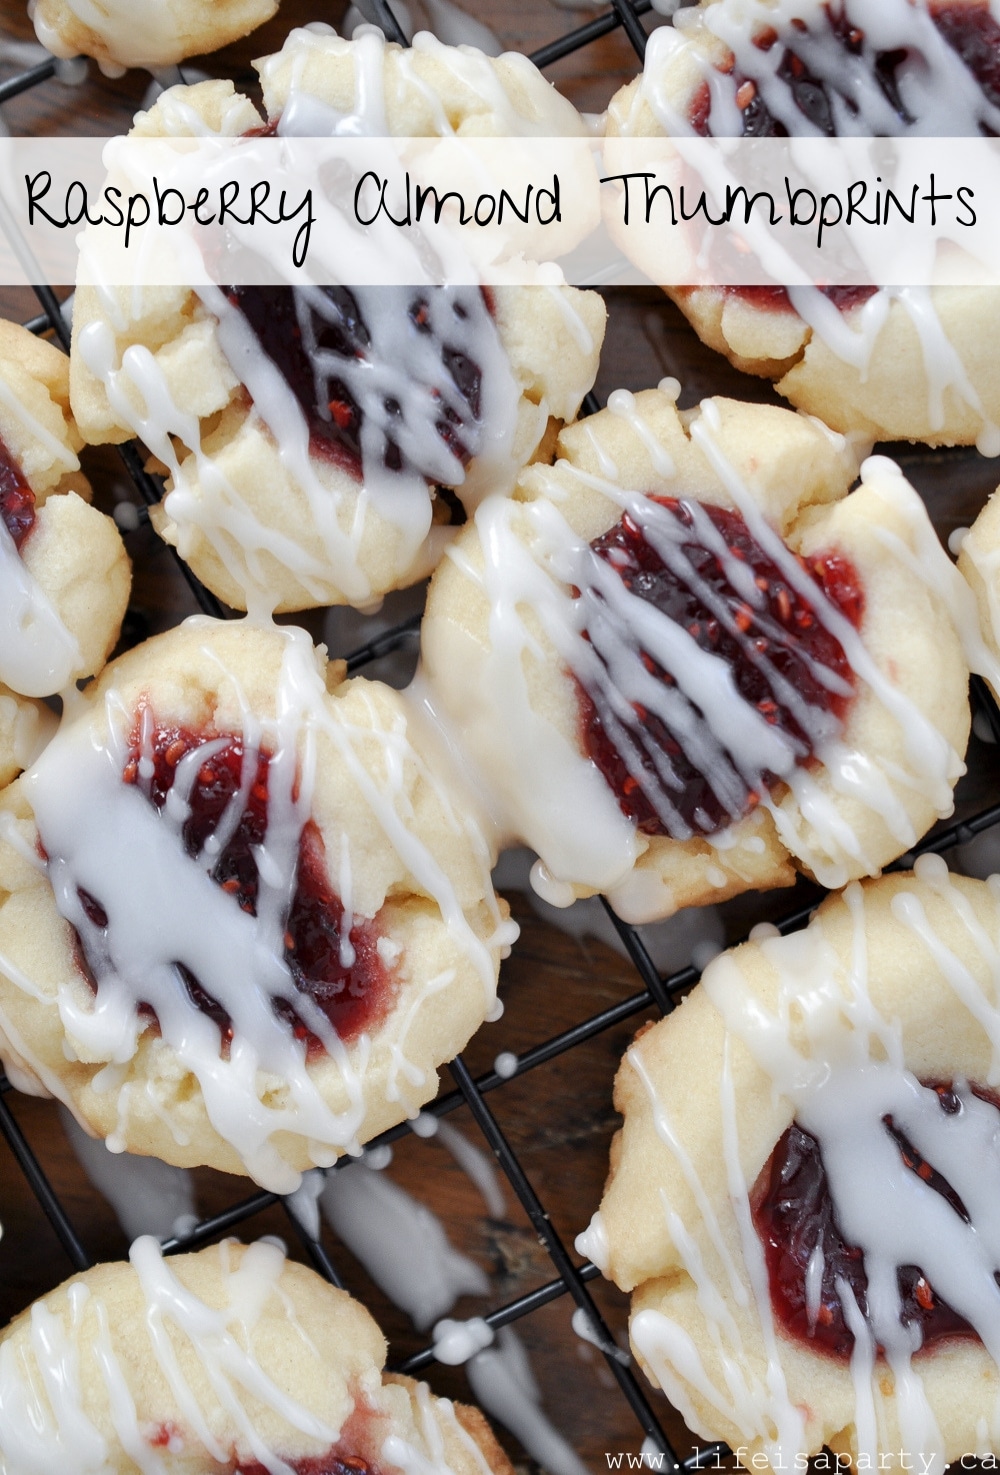 Raspberry Almond Thumbprint Cookies: with an almond shortbread base, raspberry jam filling, and a drizzle of almond icing on top these cookies are perfect.